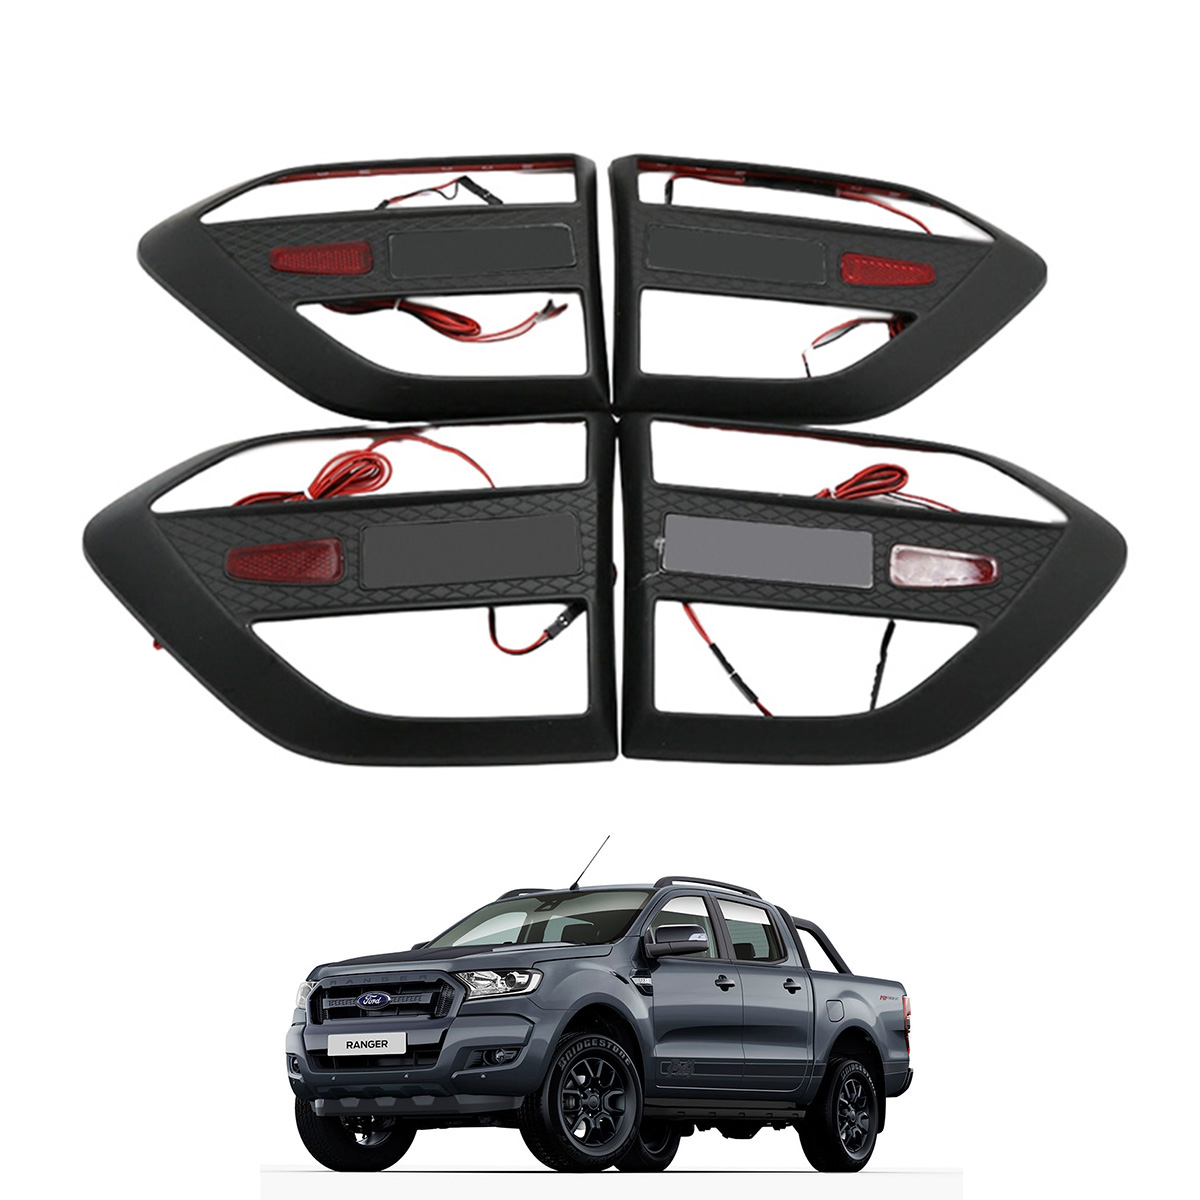 ABS Black Side Vent Cover With LED For Ford Ranger 2015-2017